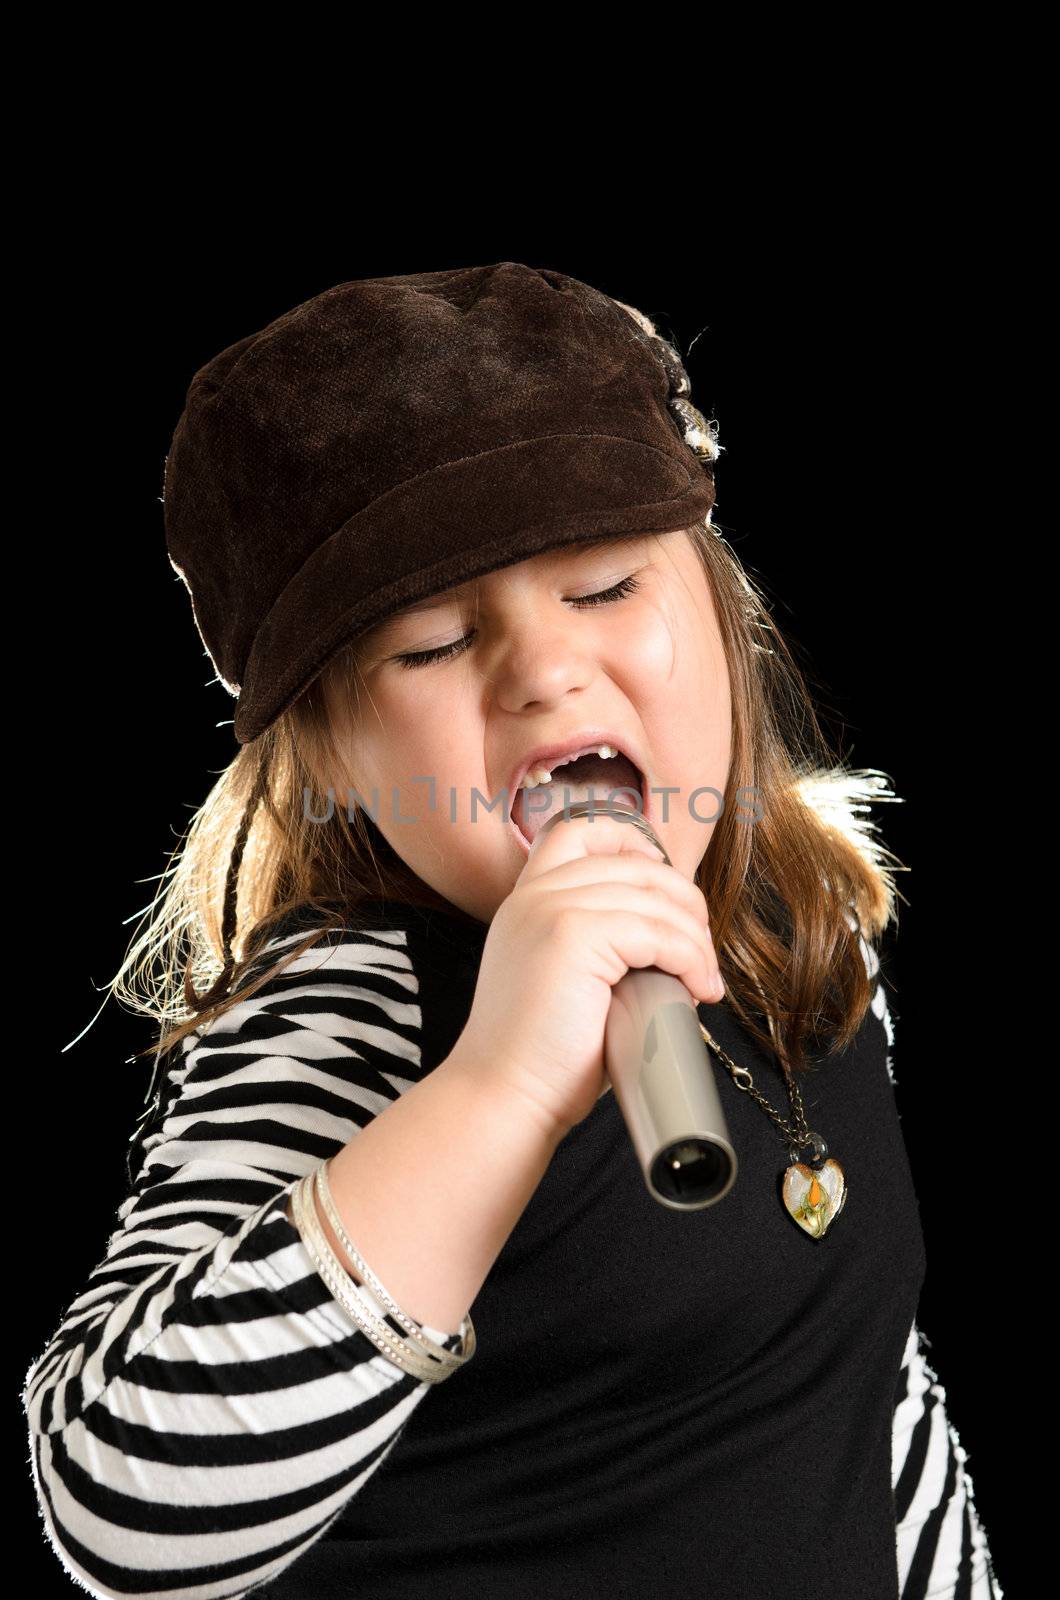 A young girl is singing like a pop star, isolated against a black background.